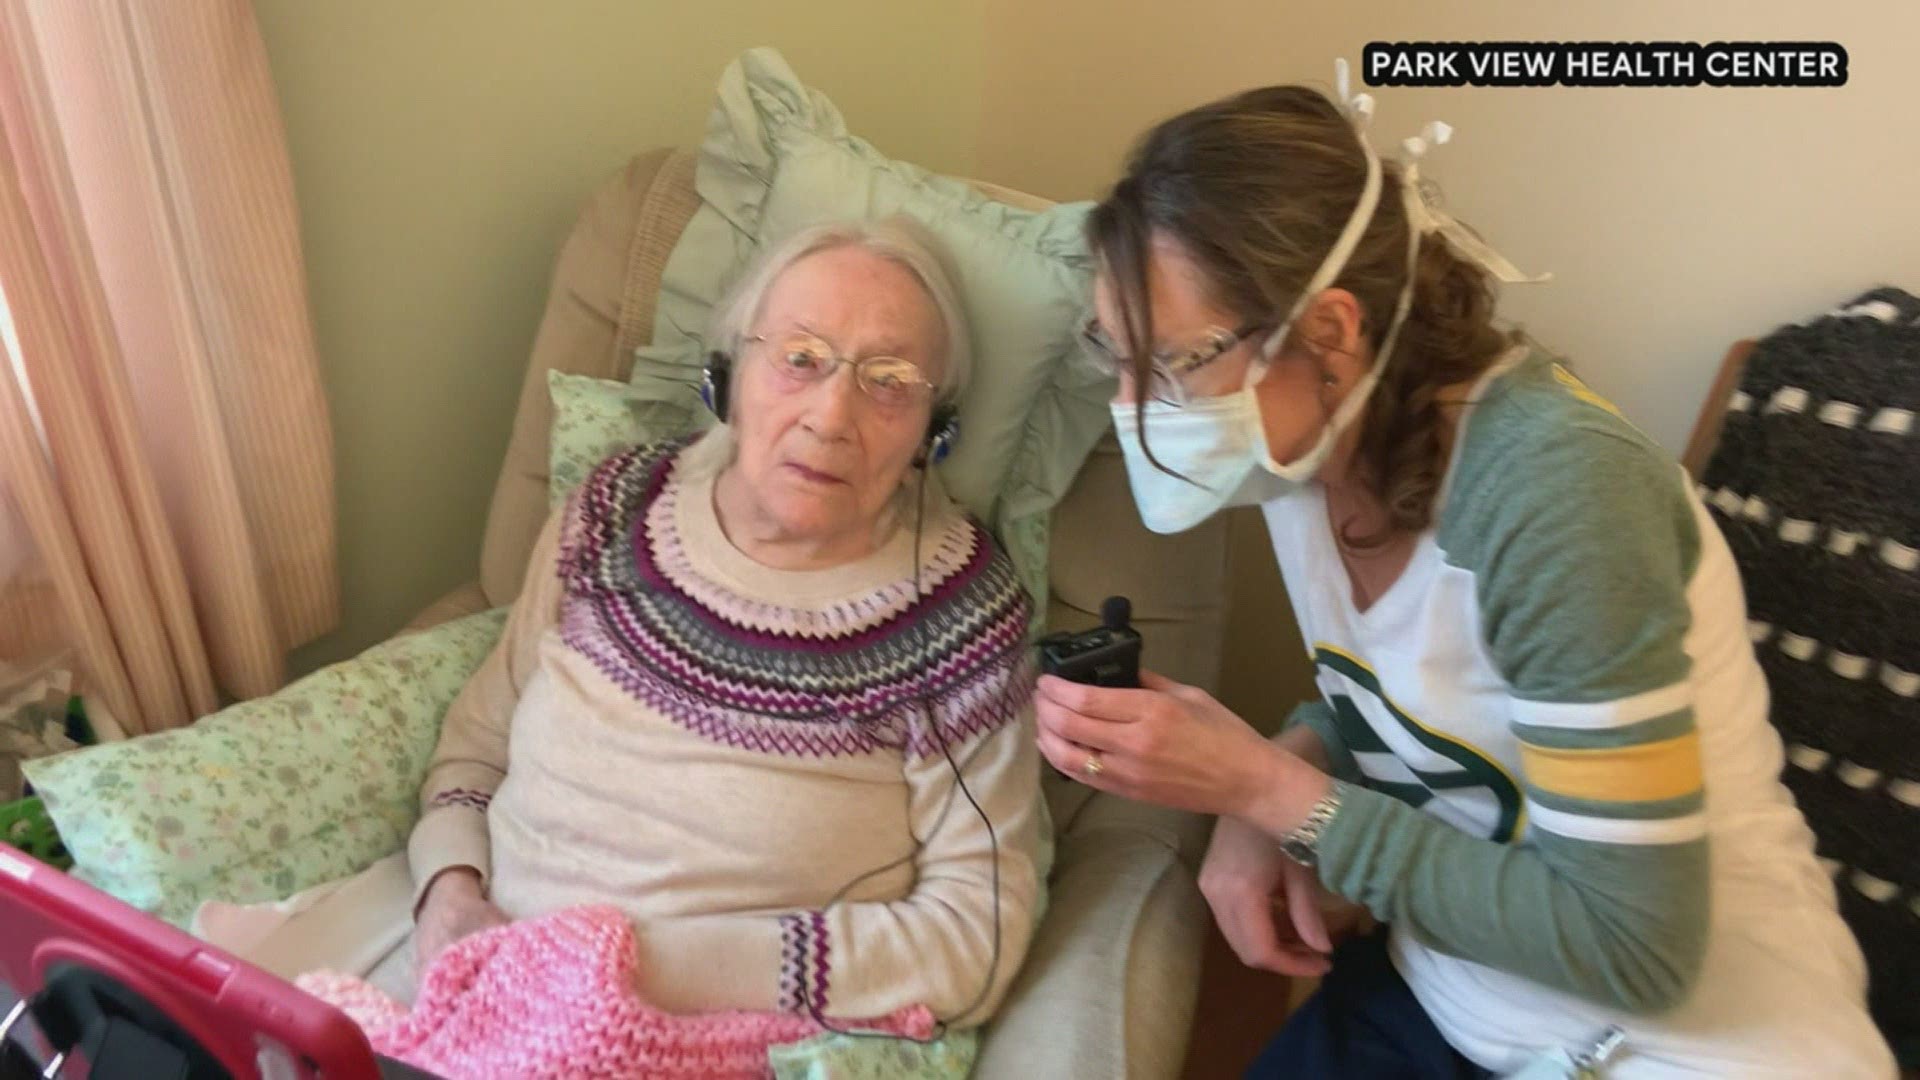 A Wisconsin woman has won her battle with COVID-19. Now Ruth Stryzewski is looking forward to celebrating her 109th birthday.